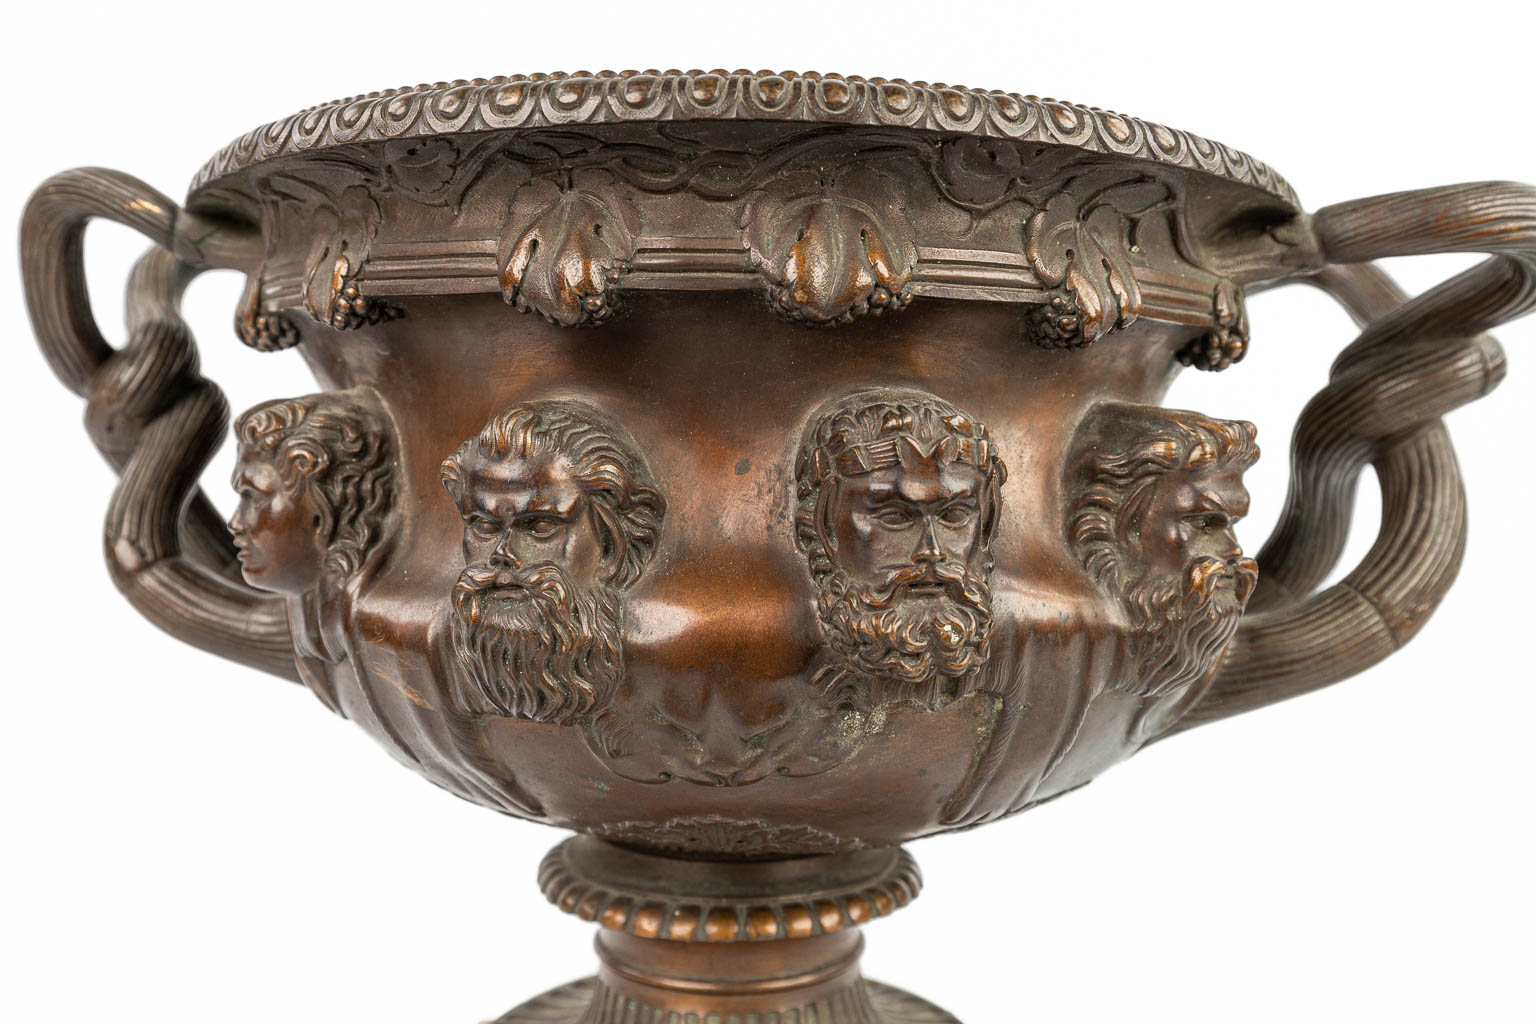 A table centerpiece made of patinated bronze mounted on marble. Marked Thibaut Frères, Fondeur Paris. (H:27cm)